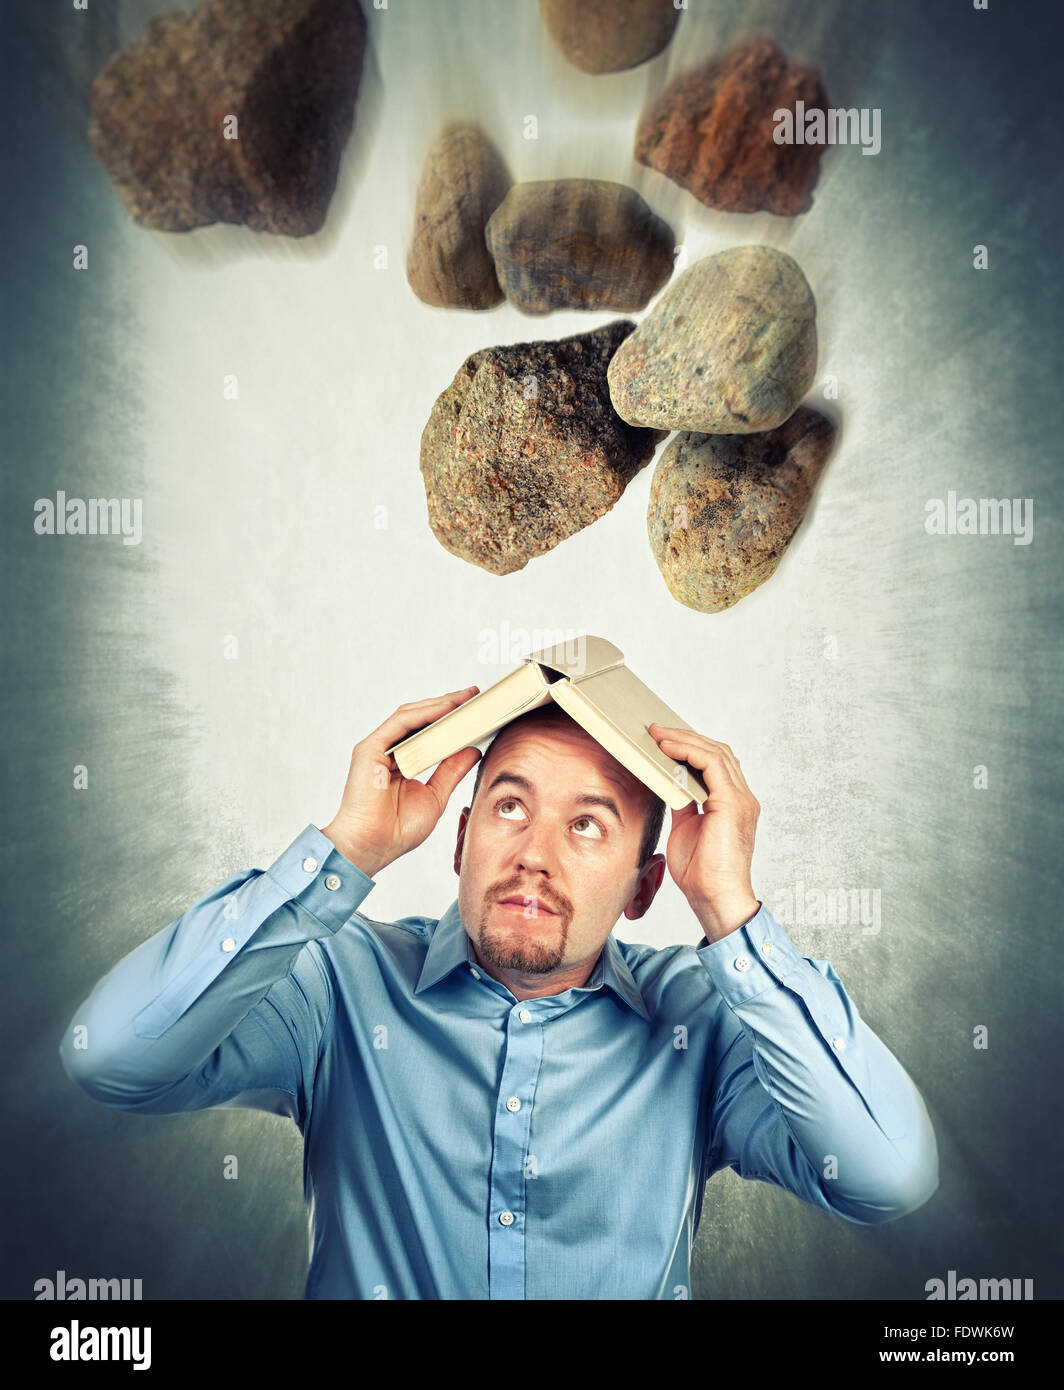 falling stone and man with book Stock Photo